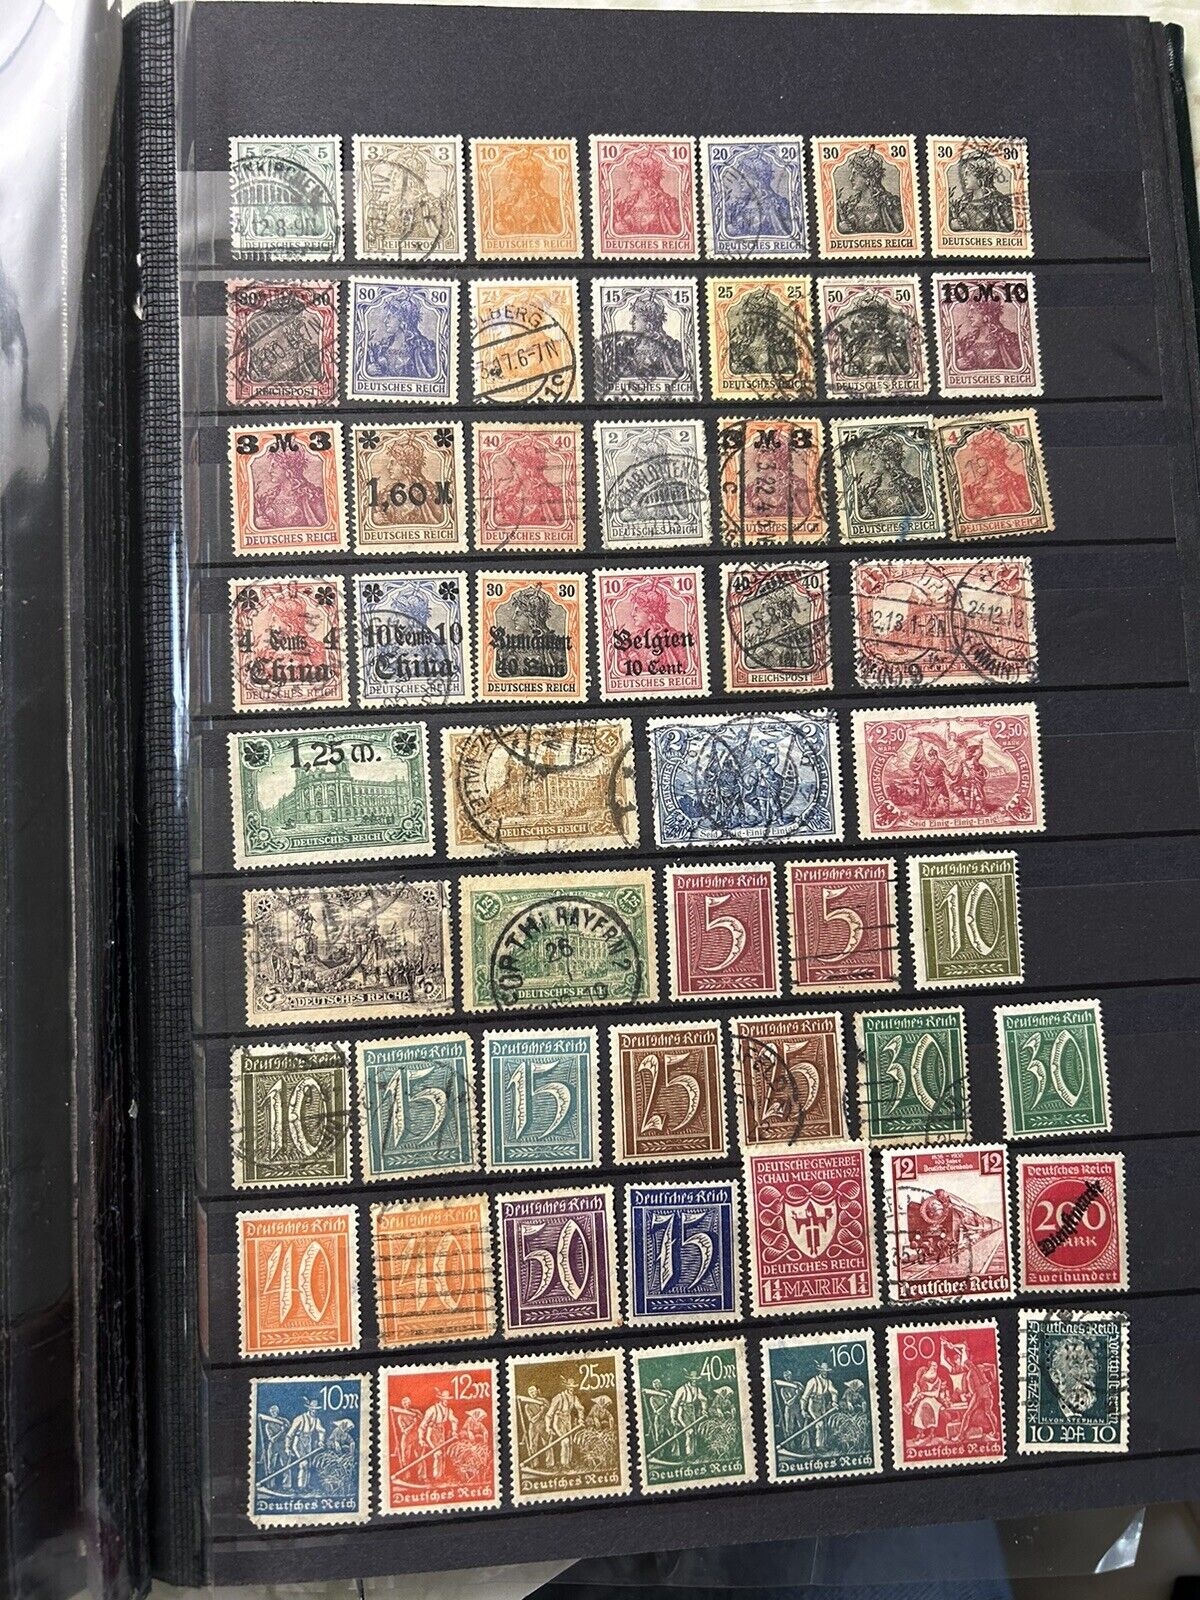 GERMANY - DEUTSCHES REICH - 286 Stamps Le